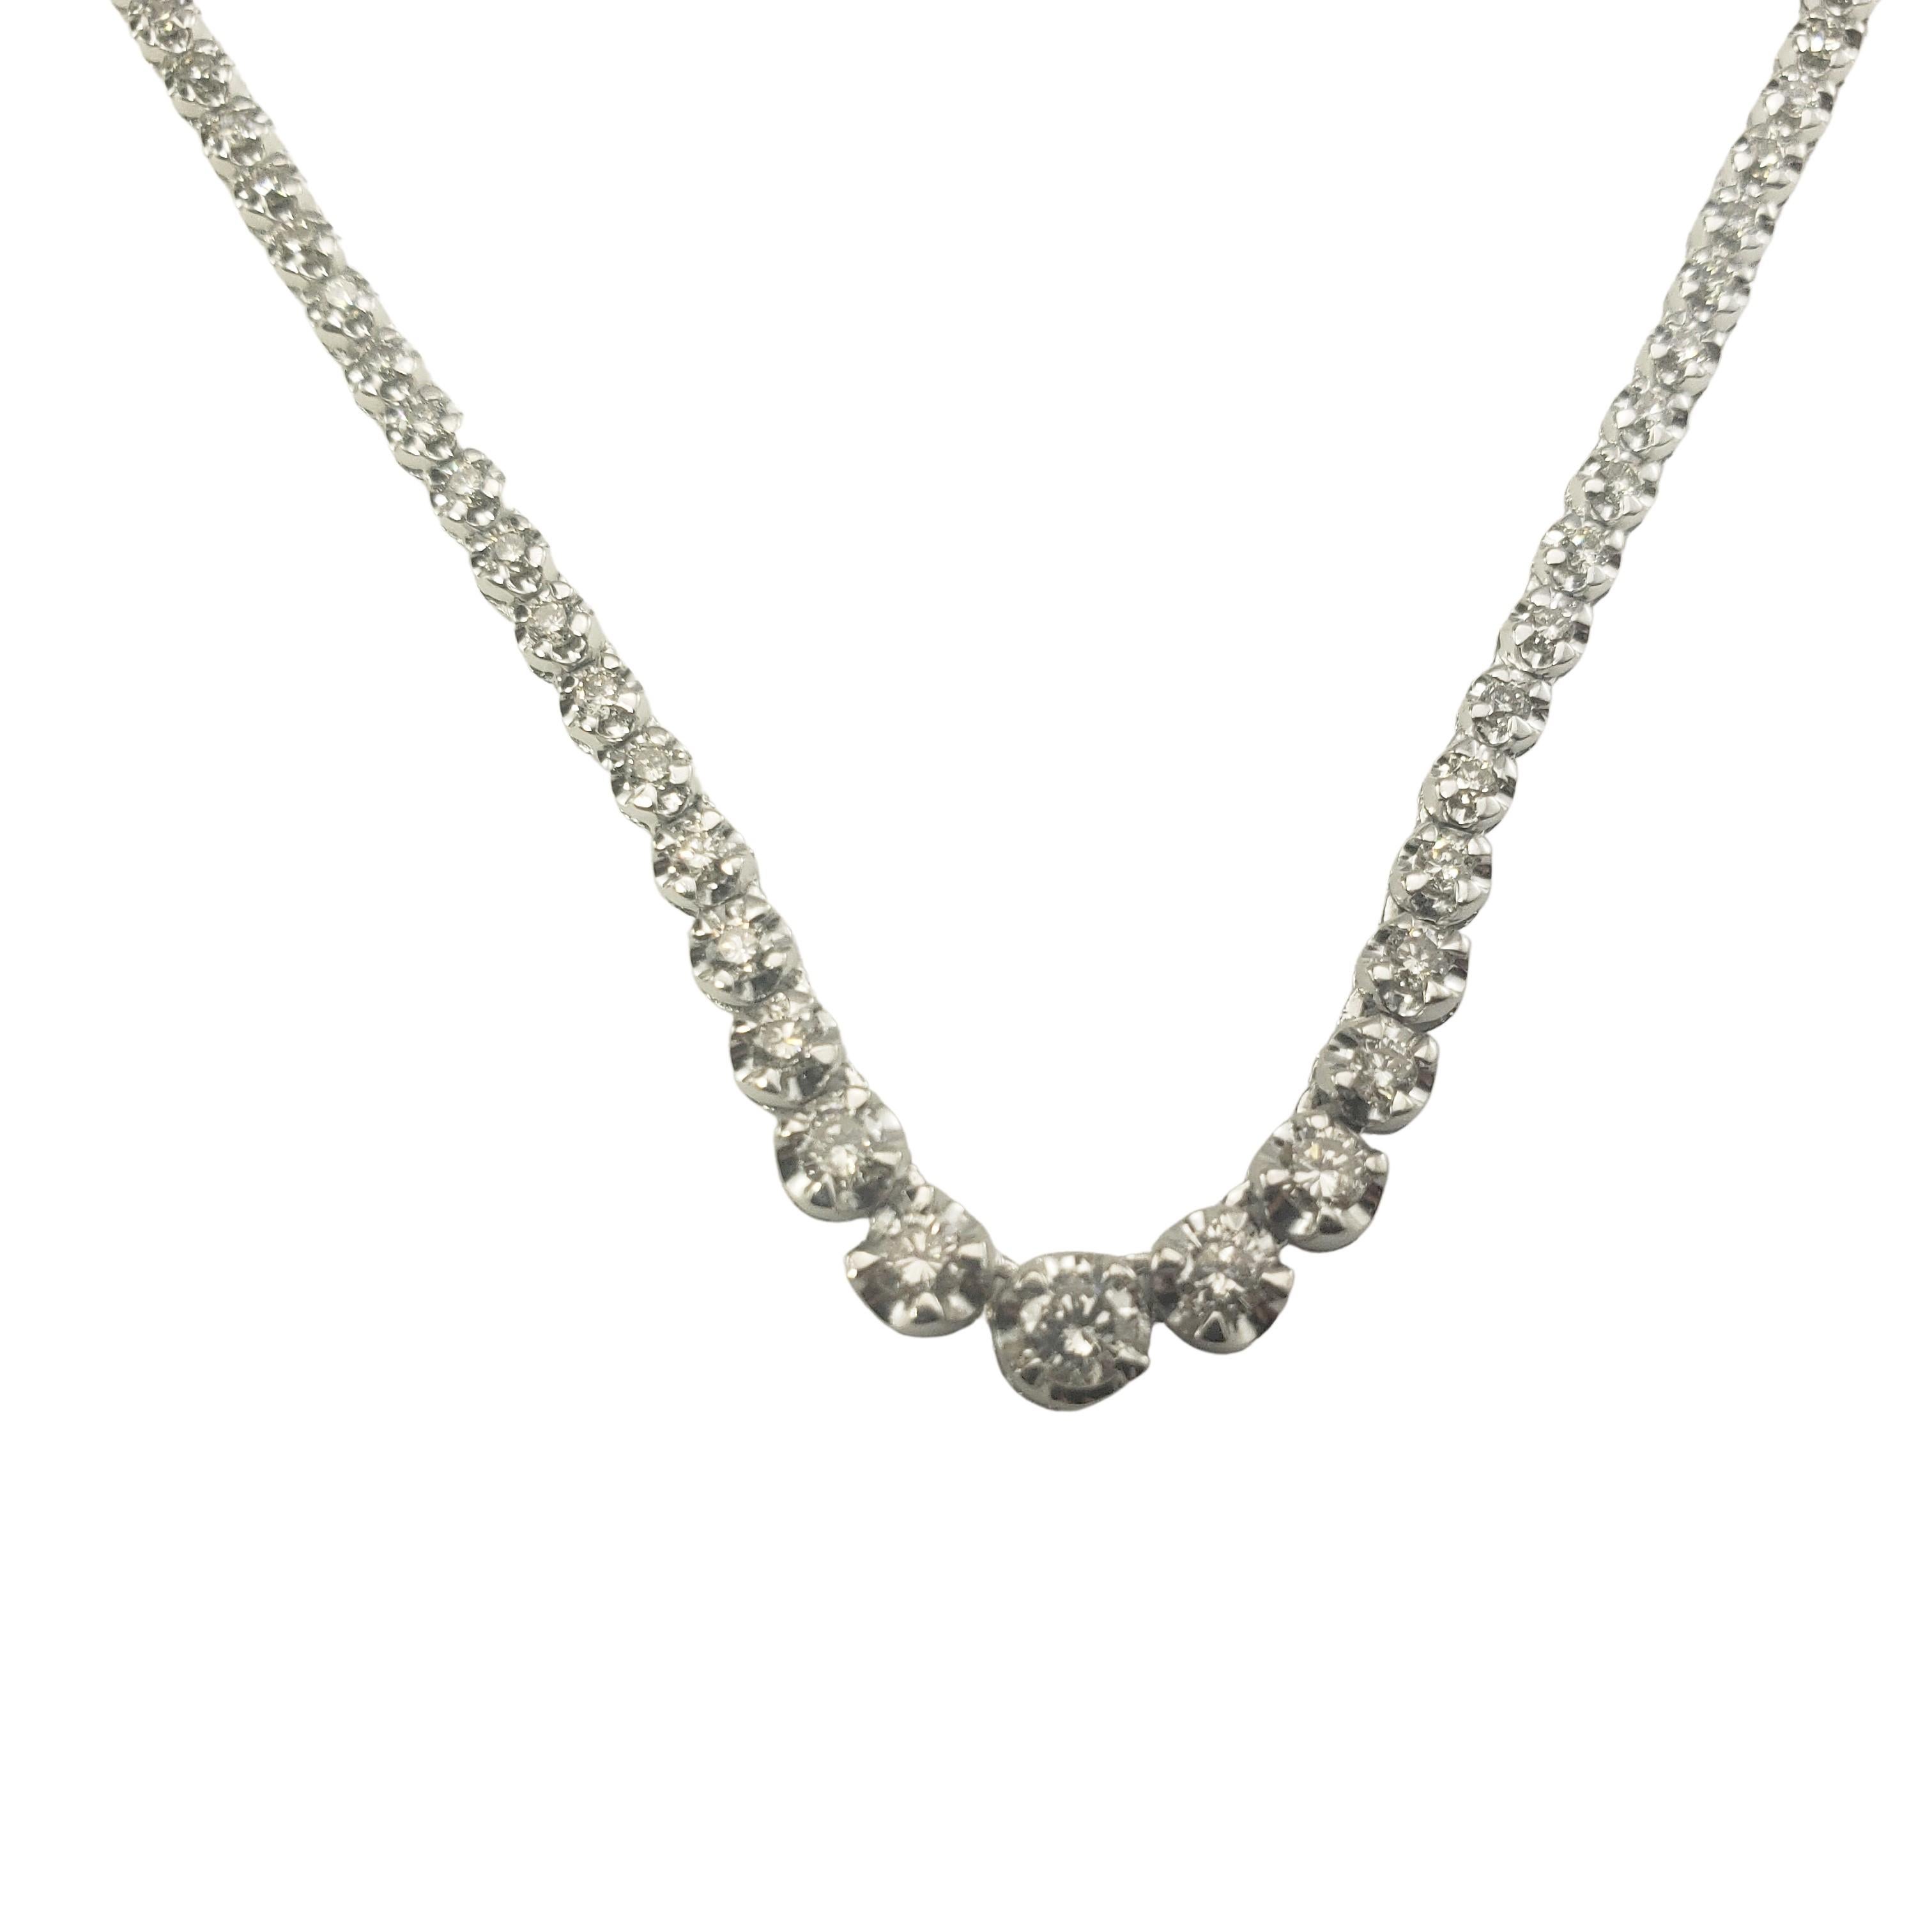 Vintage Platinum and Diamond Tennis Necklace-

This spectacular tennis necklace features 137 round brilliant cut diamonds set in classic platinum.

Approximate total diamond weight:  3 ct.

Diamond color: J-M

Diamond clarity:  SI1-I1

Size:  16.5